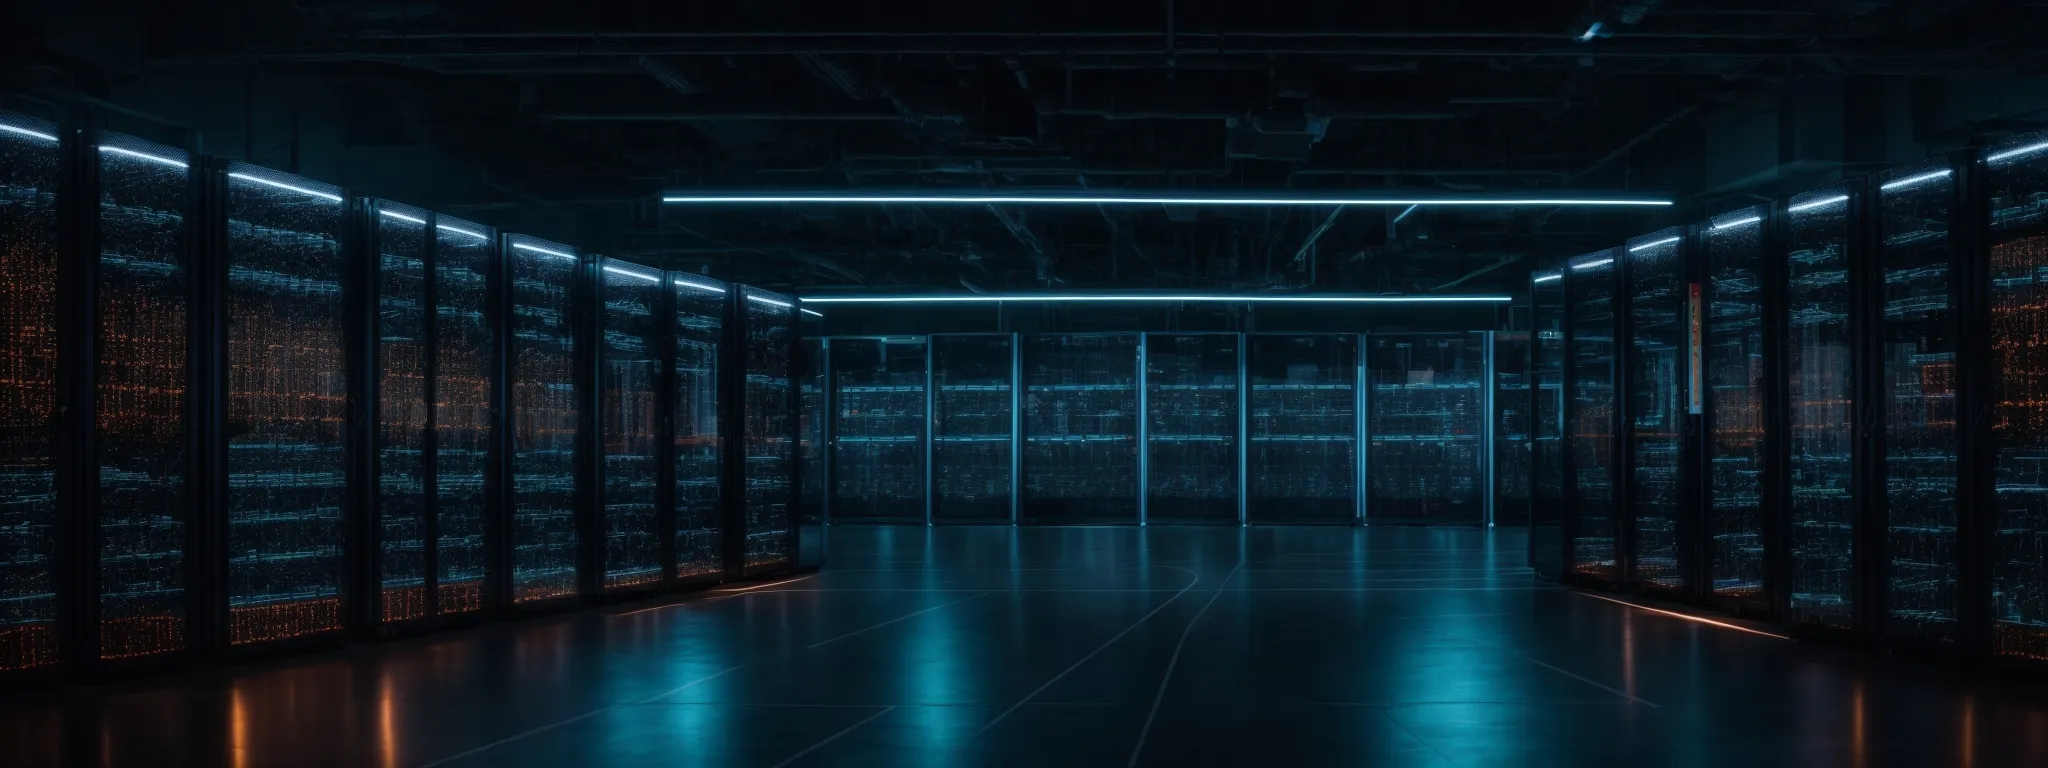 a panoramic view of a modern corporate data center with rows of high-tech servers and glowing lights representing data processing and storage.